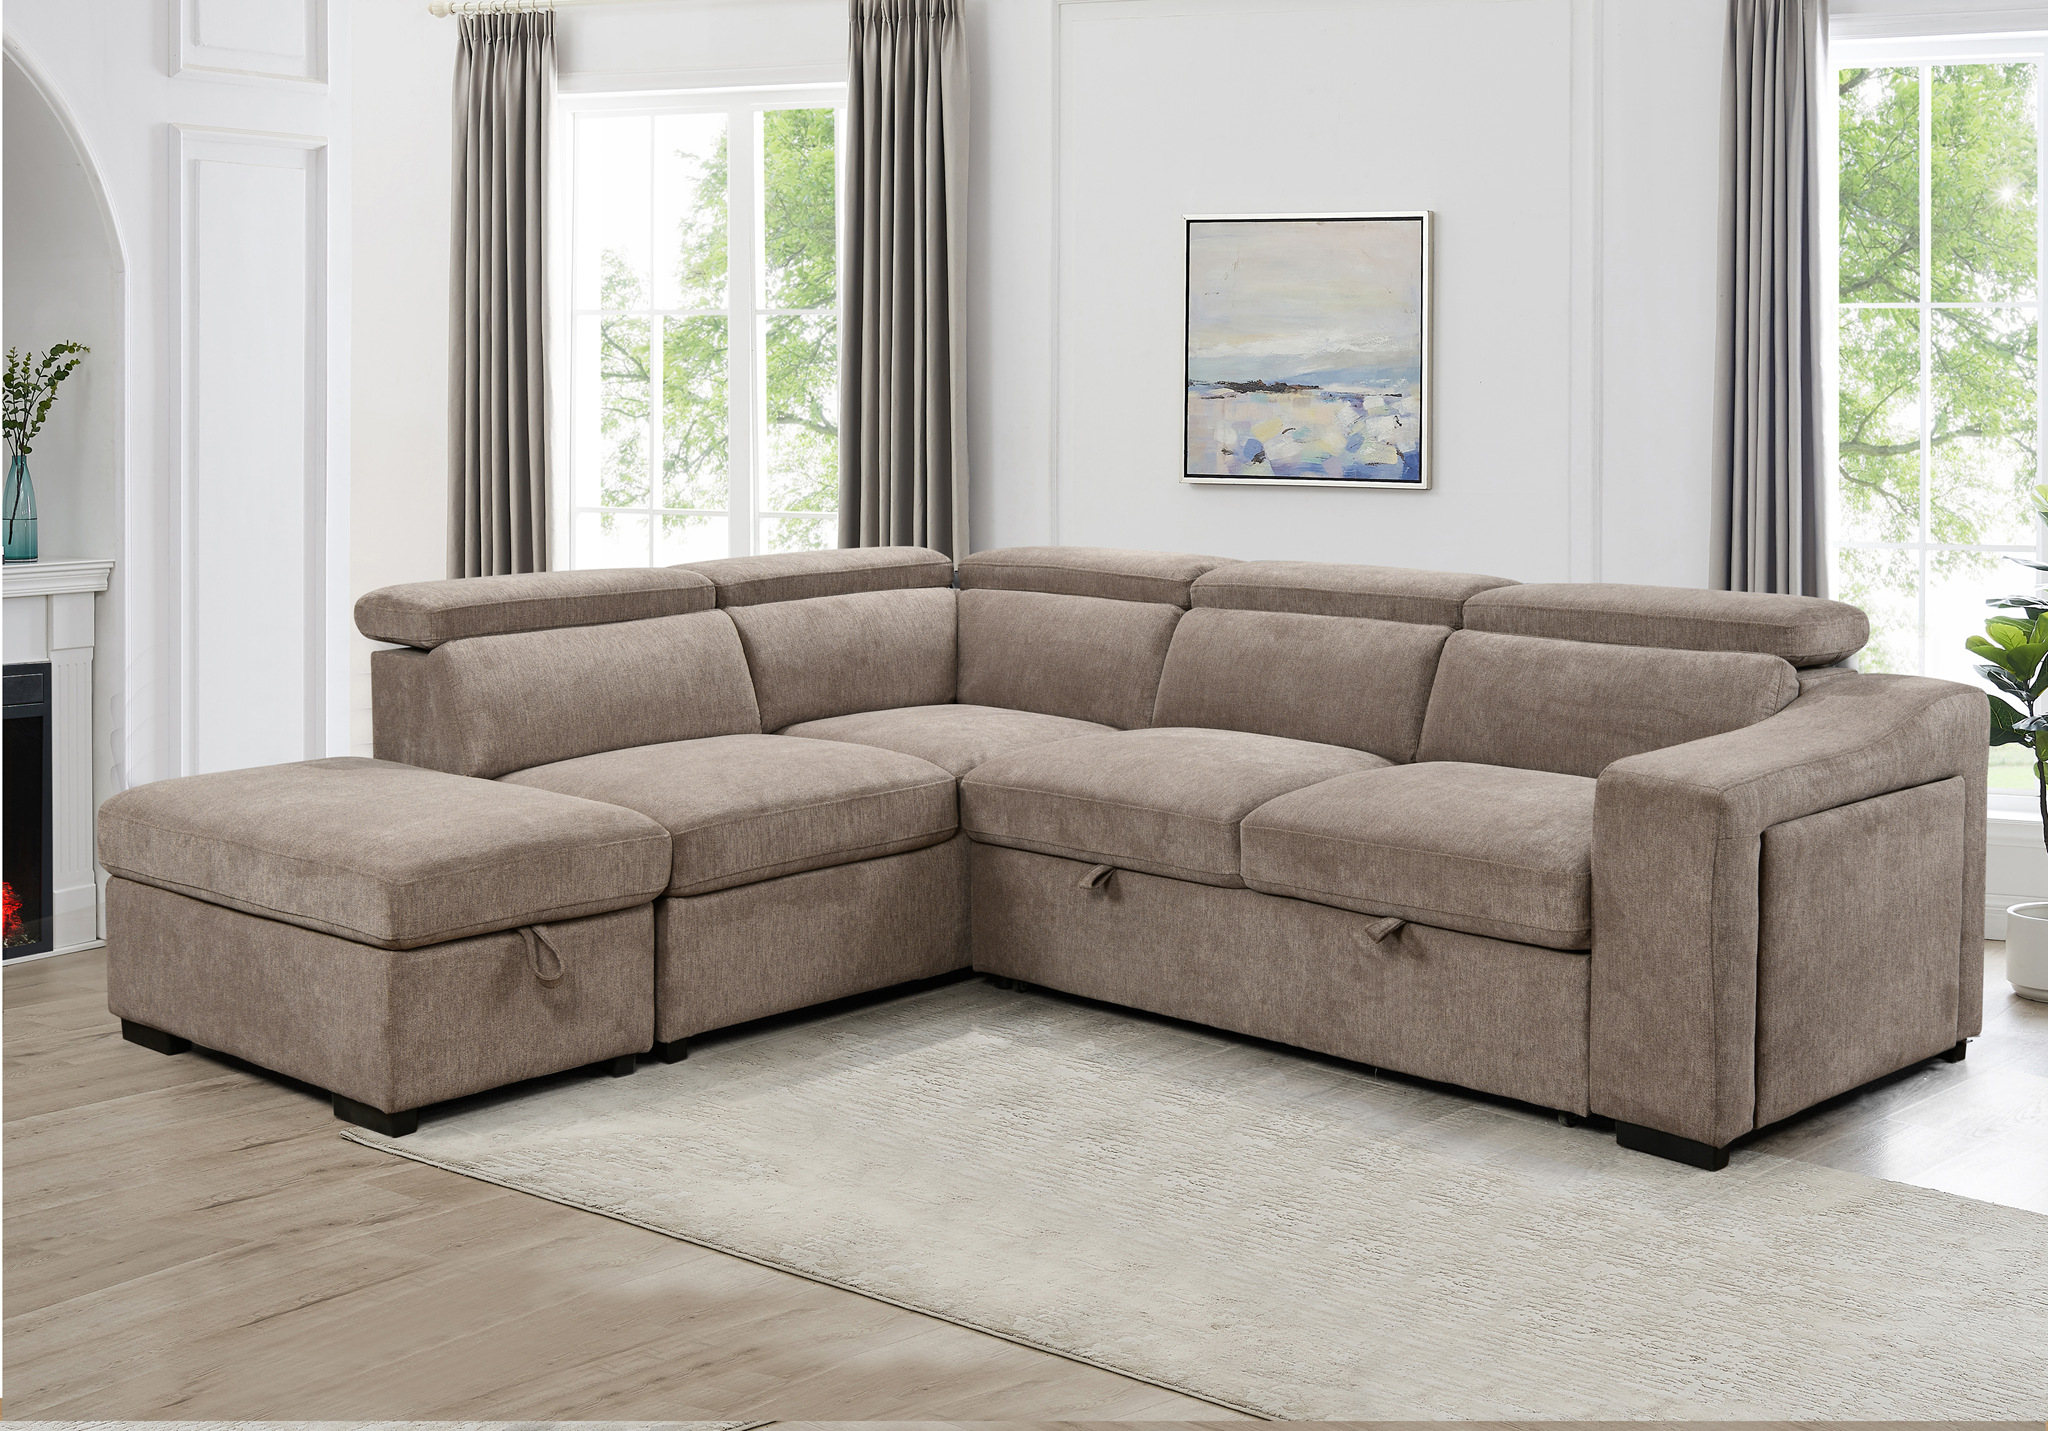 Courtney Sofa Bed - 7626 - Richicollection Furniture Warehouse